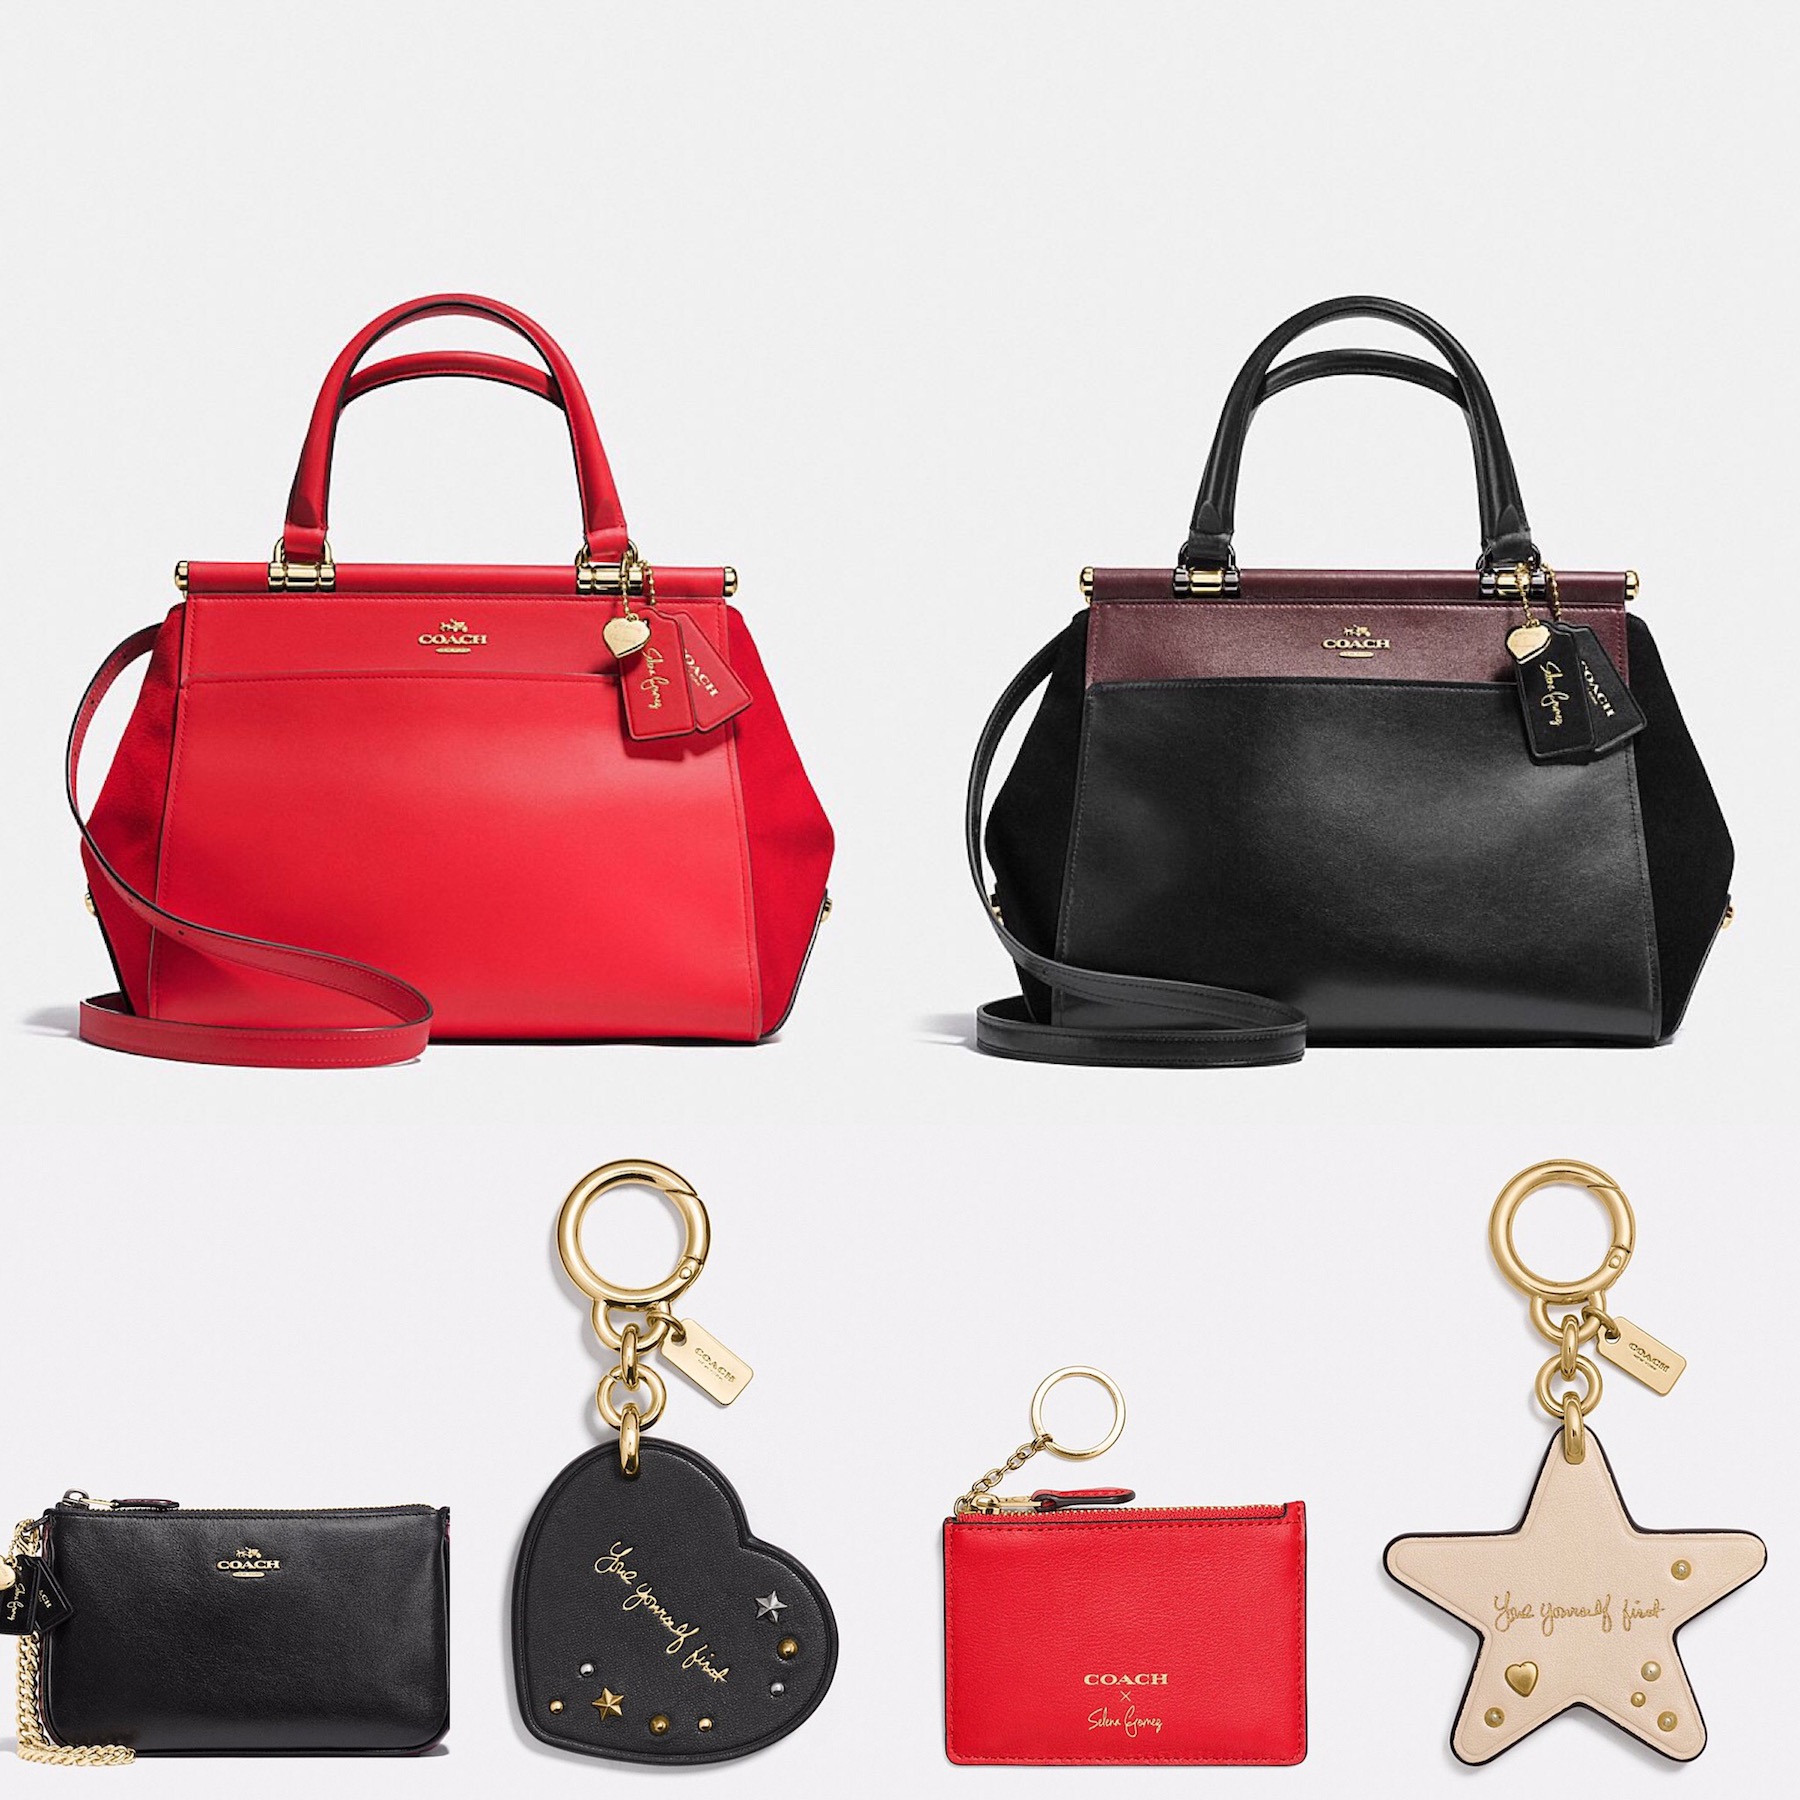 Coach x Selena Gomez Collaboration Collection of handbags and accessories